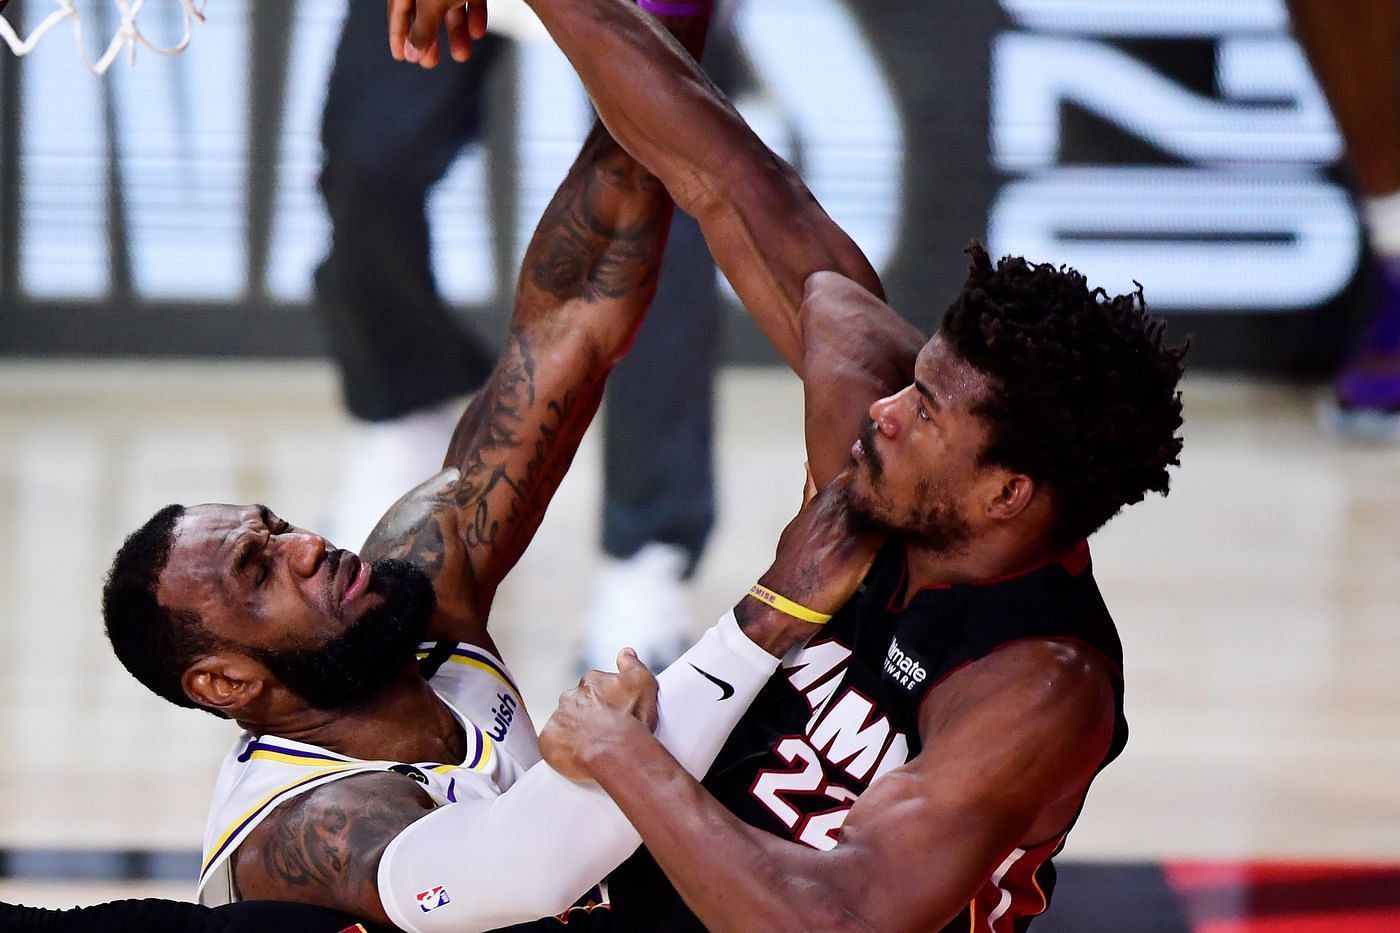 The Miami Heat handed the LA Lakers another disappointing loss. [Photo: Pounding the Rock]